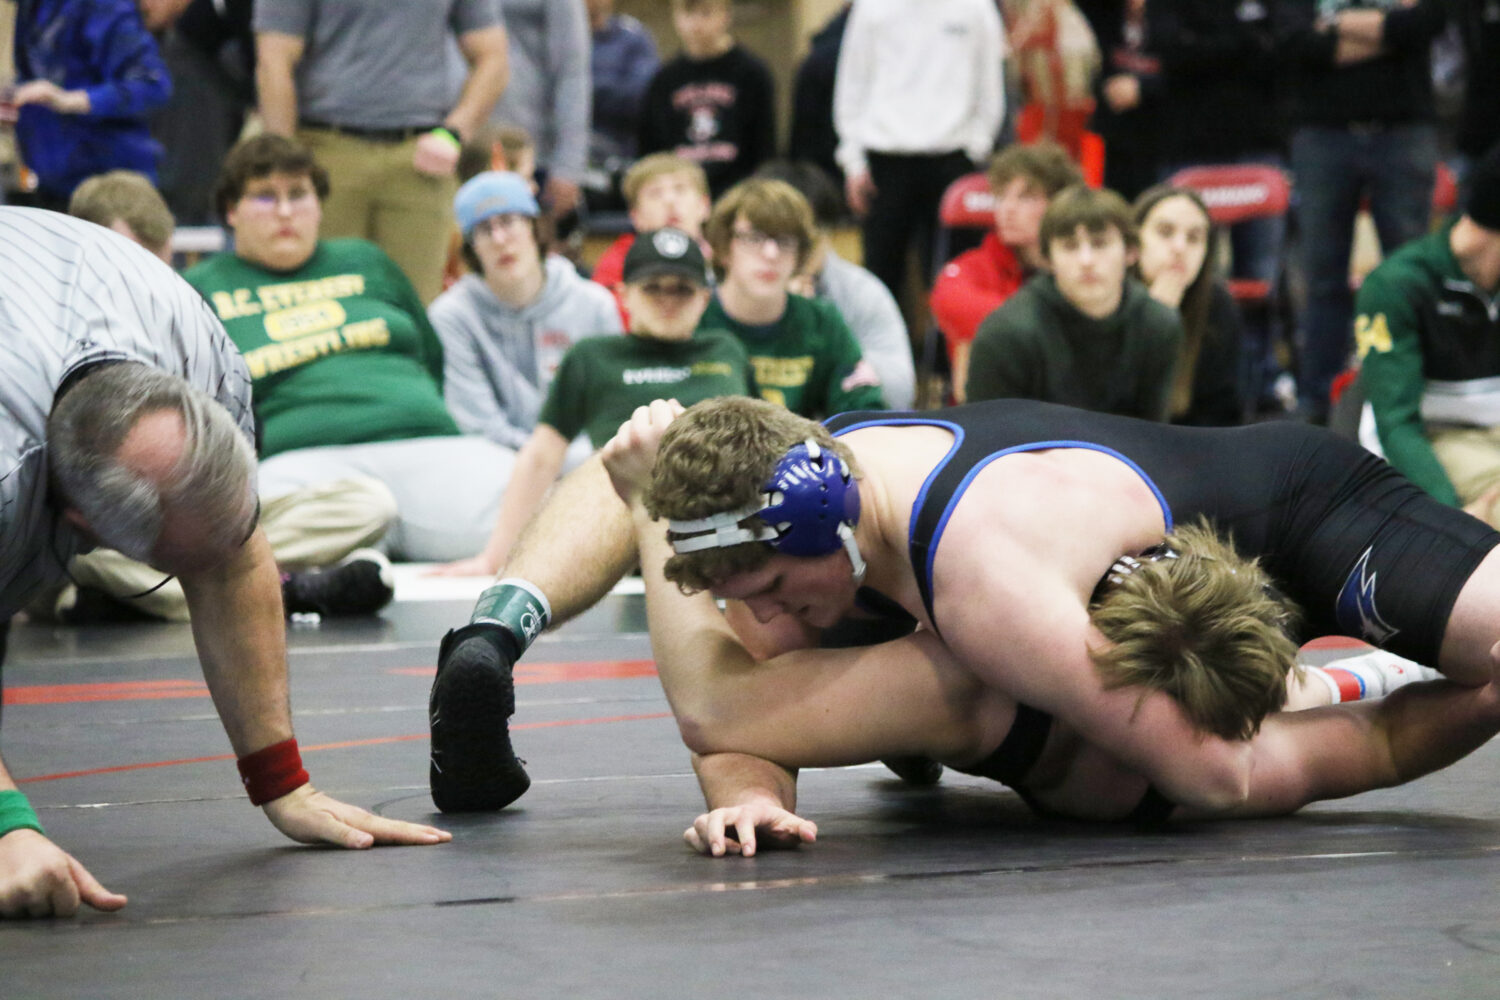 Merrill Wrestling: Nine wrestlers go to Sectionals; Ryder Depies moving on to State